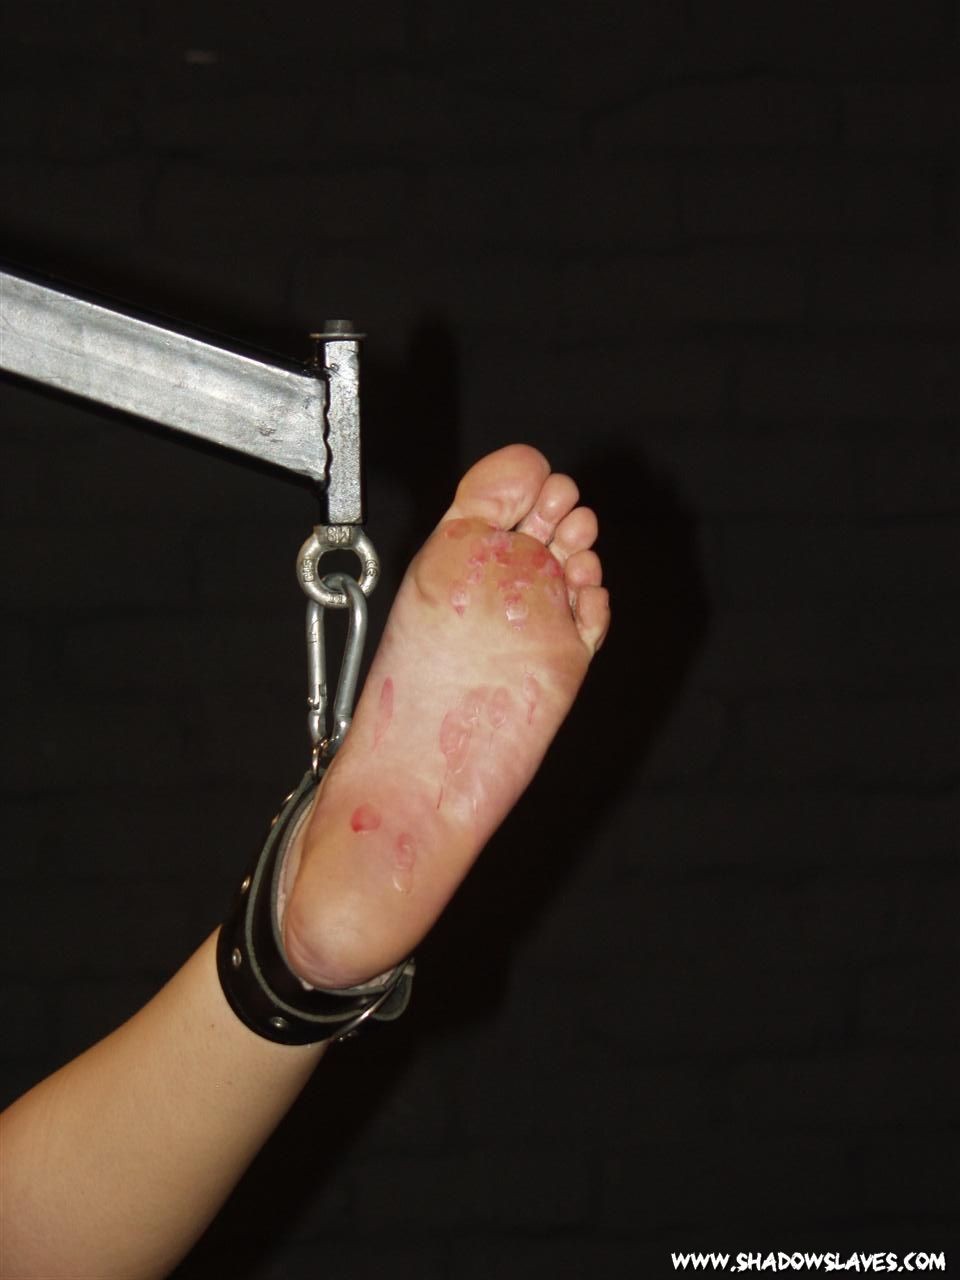 Bound feet punished and foot fetish hotwax punishment of restrained blonde amate #72084038